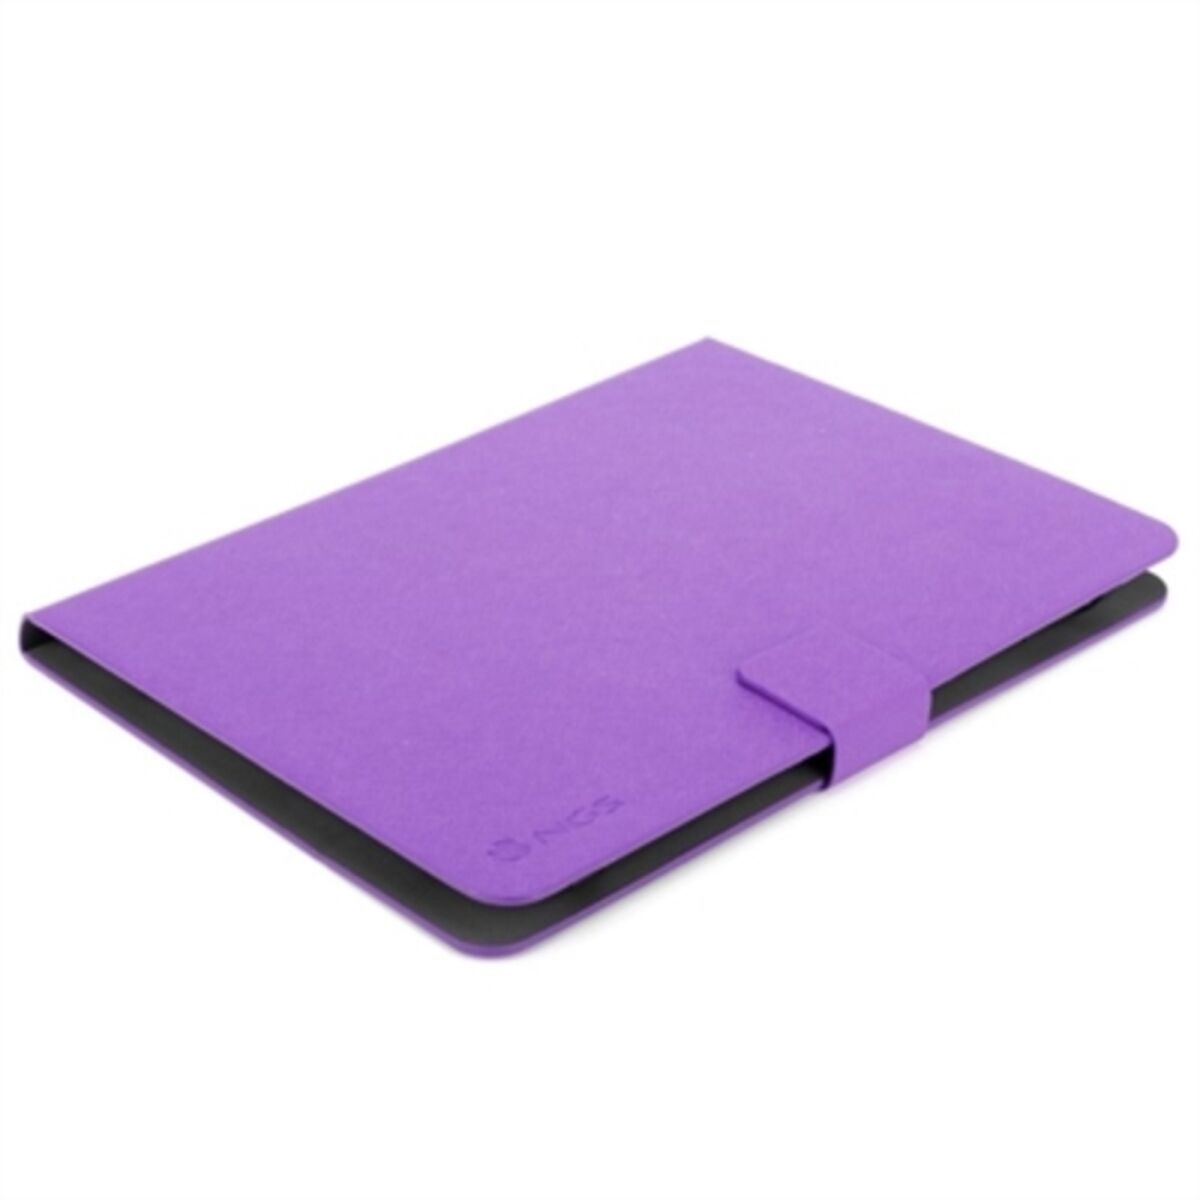 Tablet cover NGS TP-CASES-0038 Purple 7"-8", NGS, Toys and games, Electronic toys, tablet-cover-ngs-tp-cases-0038-purple-7-8, Brand_NGS, category-reference-2609, category-reference-2617, category-reference-2626, category-reference-t-11190, category-reference-t-11203, category-reference-t-11206, category-reference-t-19663, Condition_NEW, entertainment, para los más peques, Price_20 - 50, telephones & tablets, vuelta al cole, RiotNook